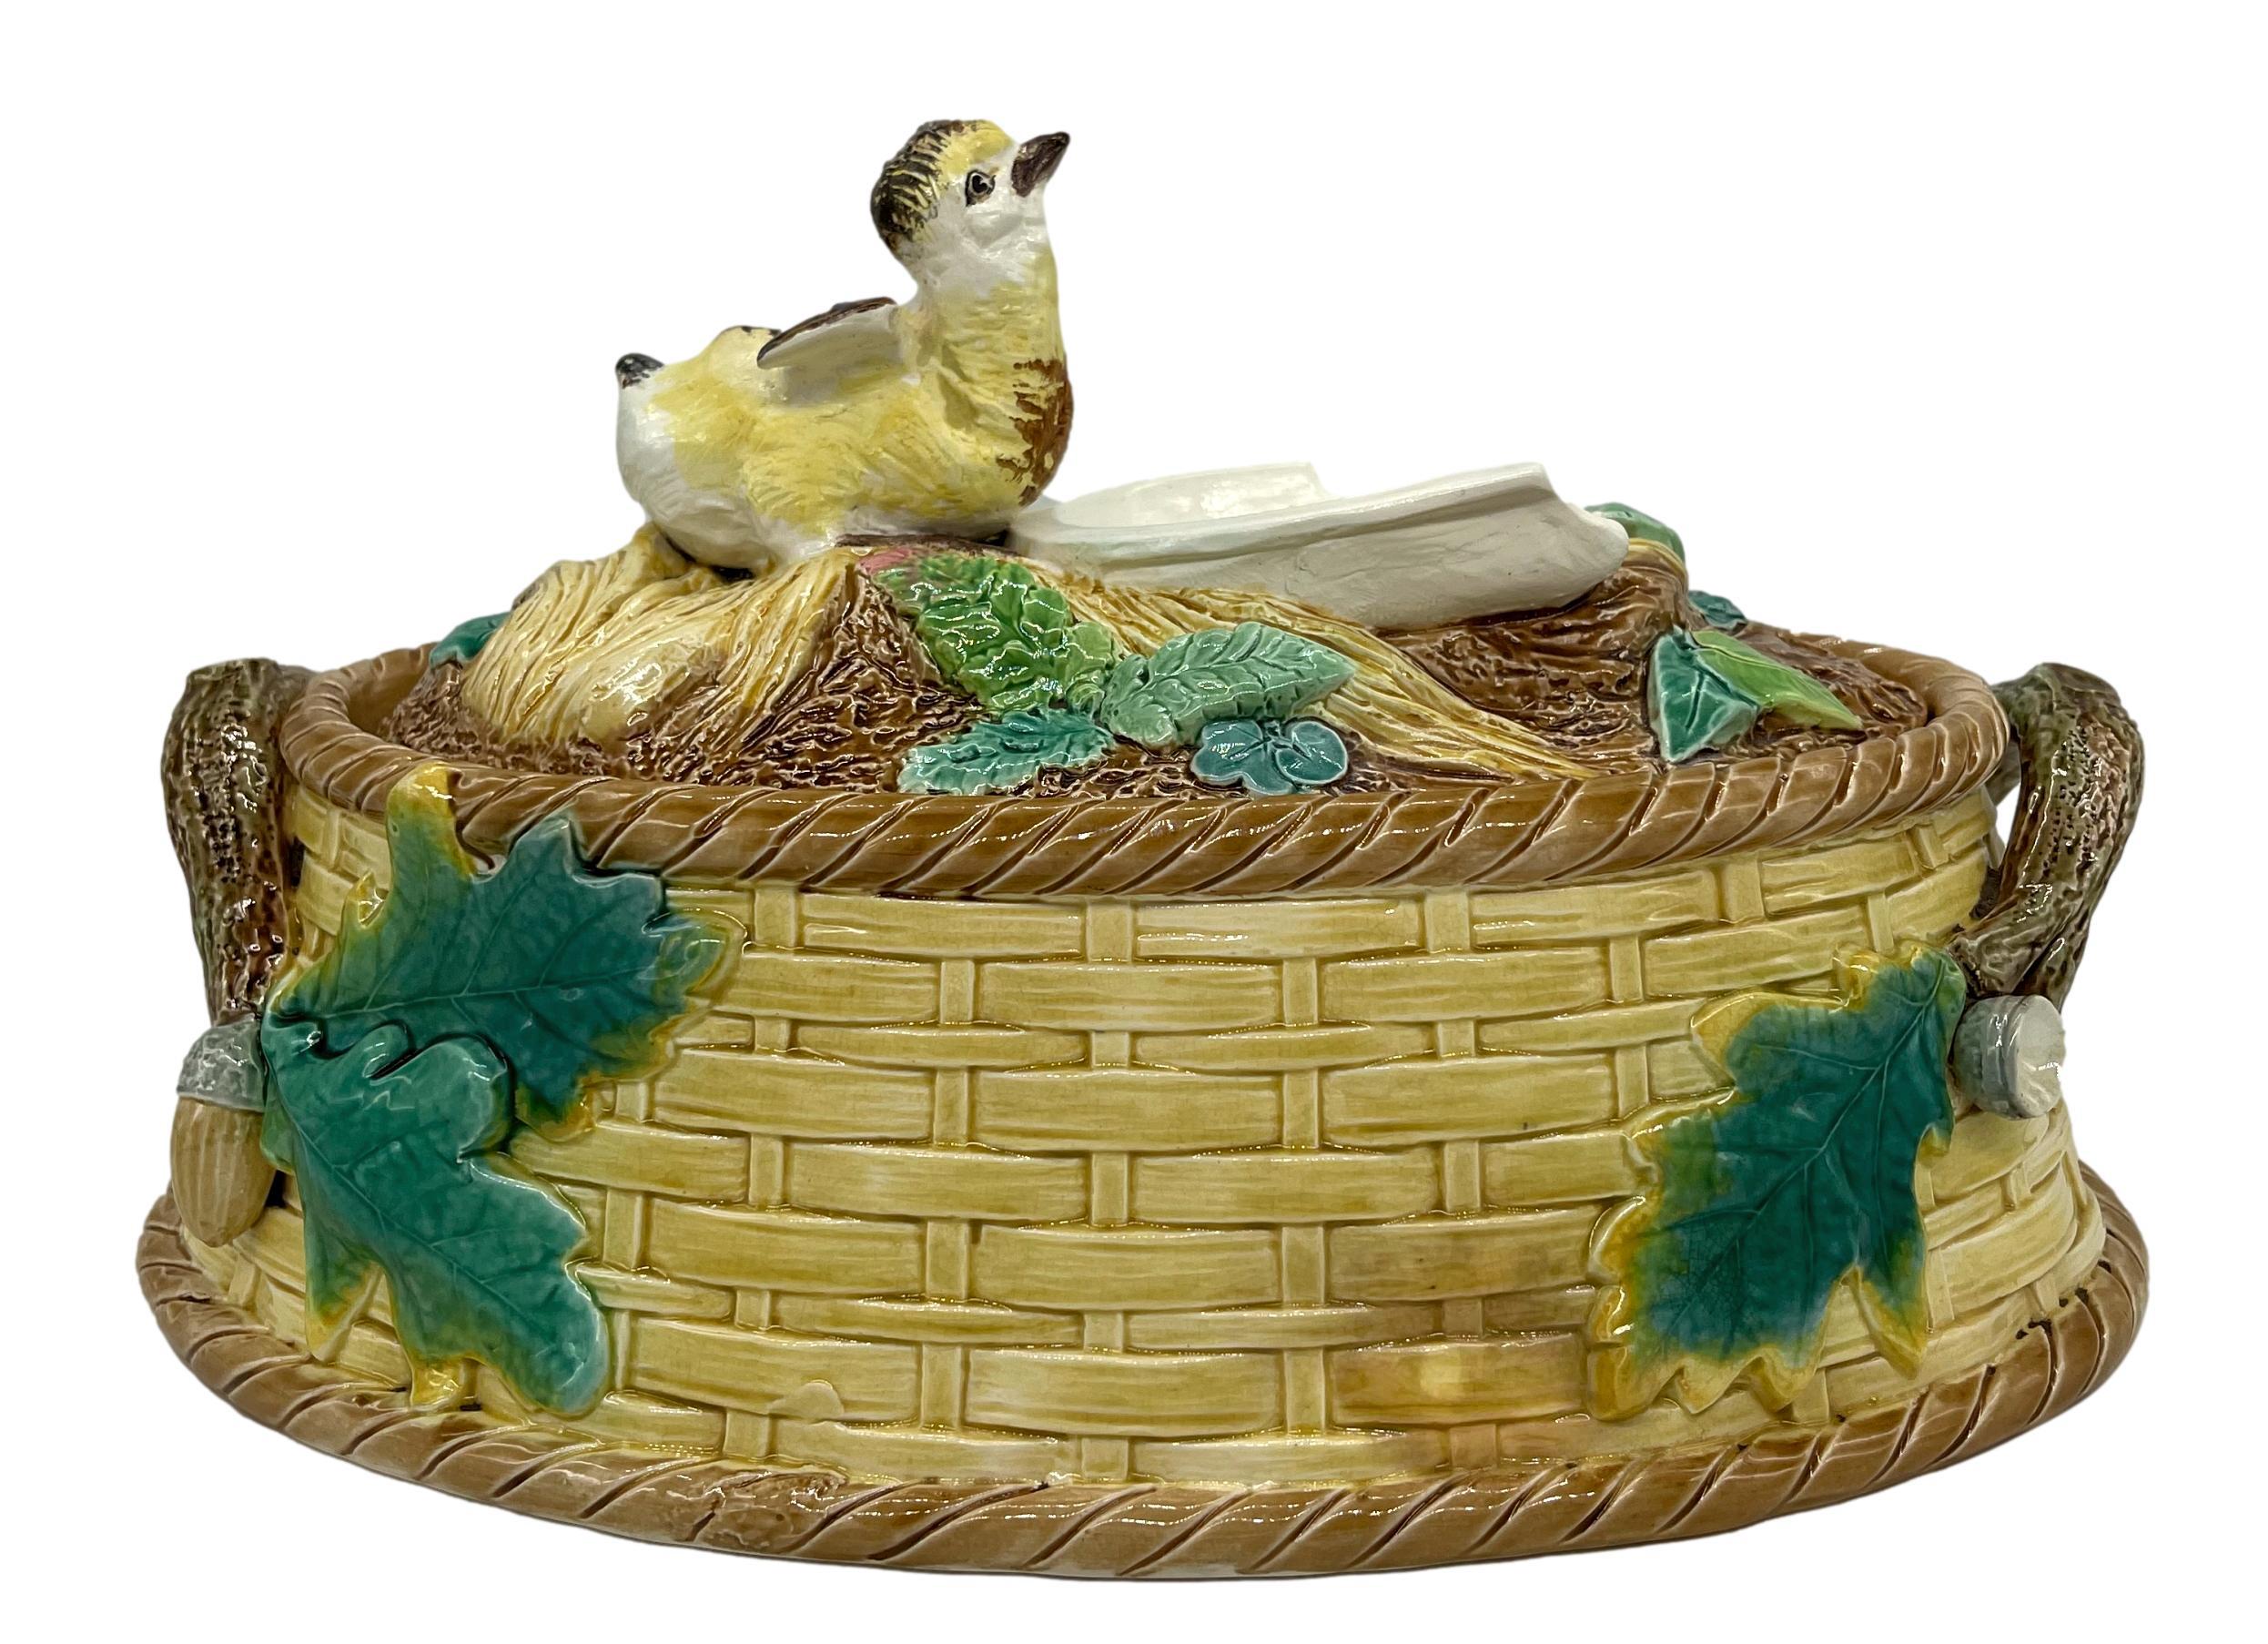 19th Century Brown-Westhead, Moore Majolica Game Tureen with Grouse Chick, English, ca. 1875